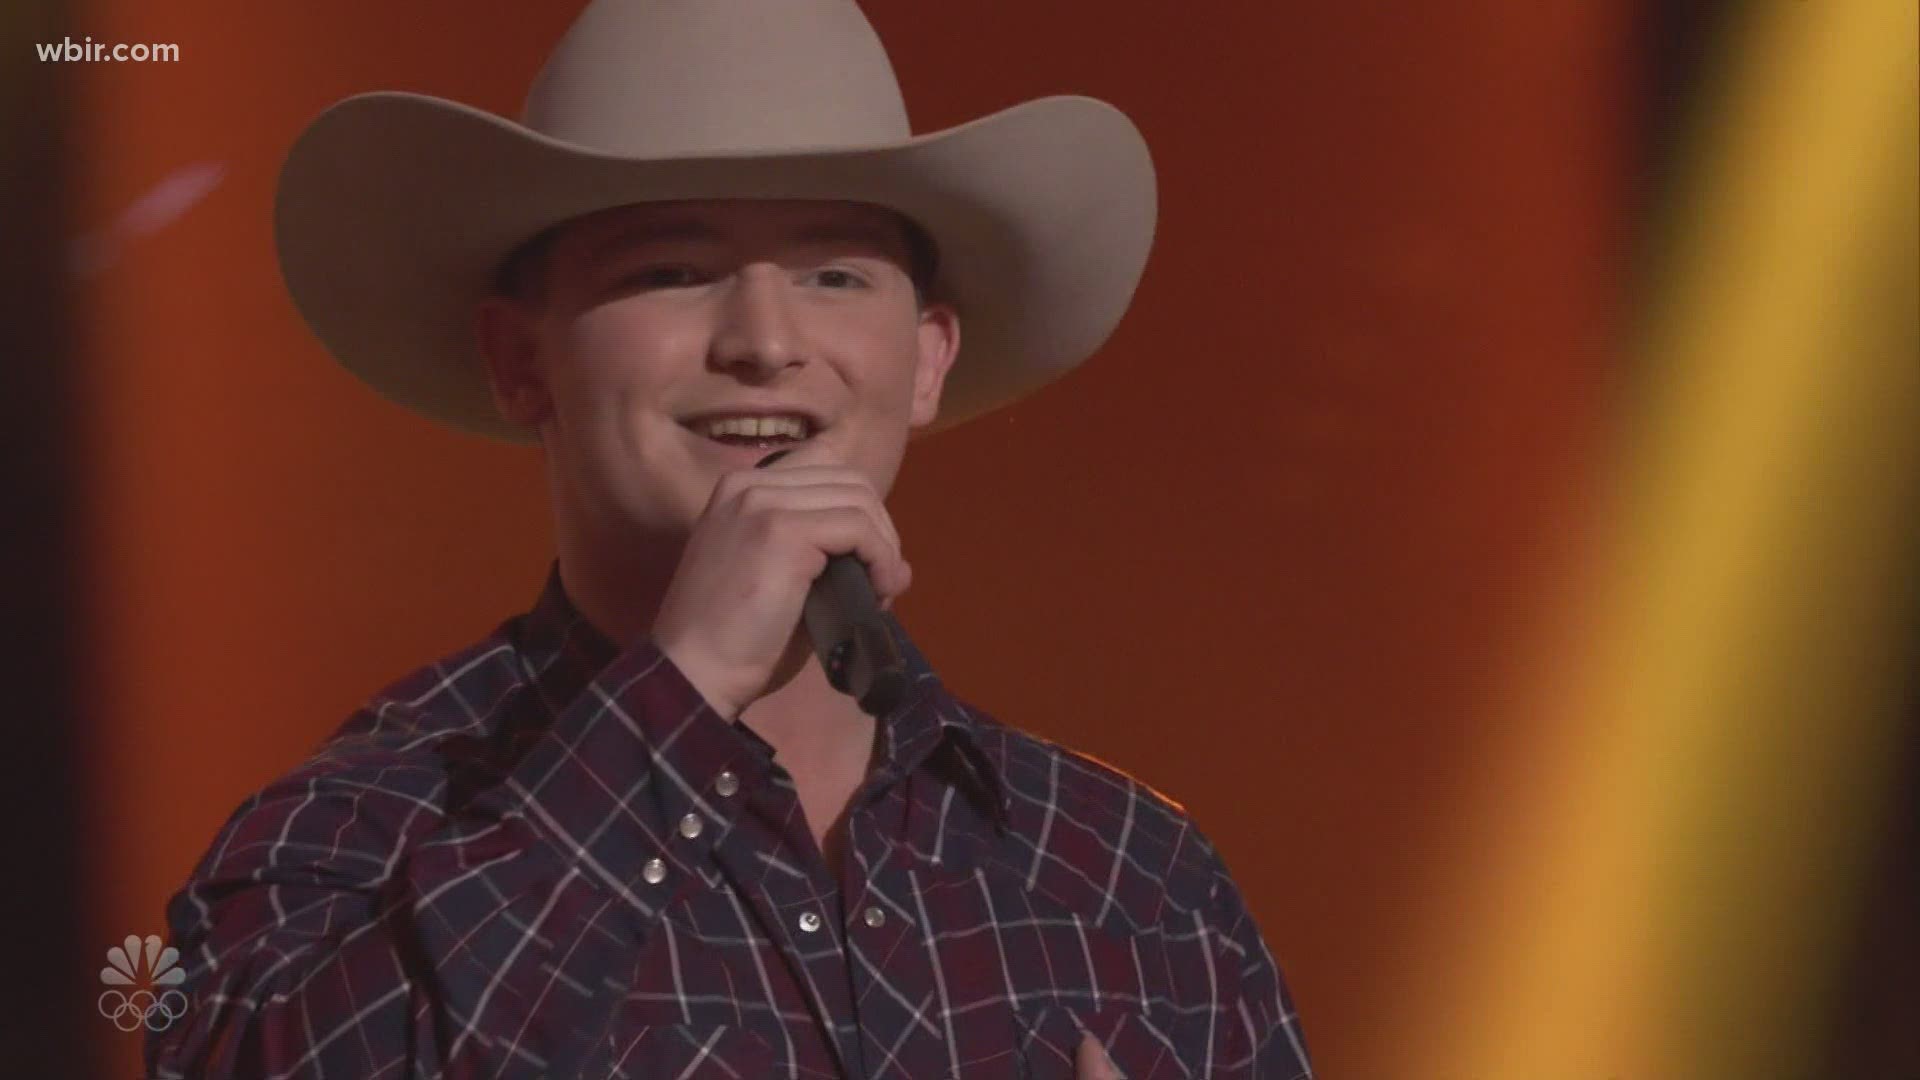 The 17-year-old impressed with his rendition of George Strait's "You Look So Good in Love."